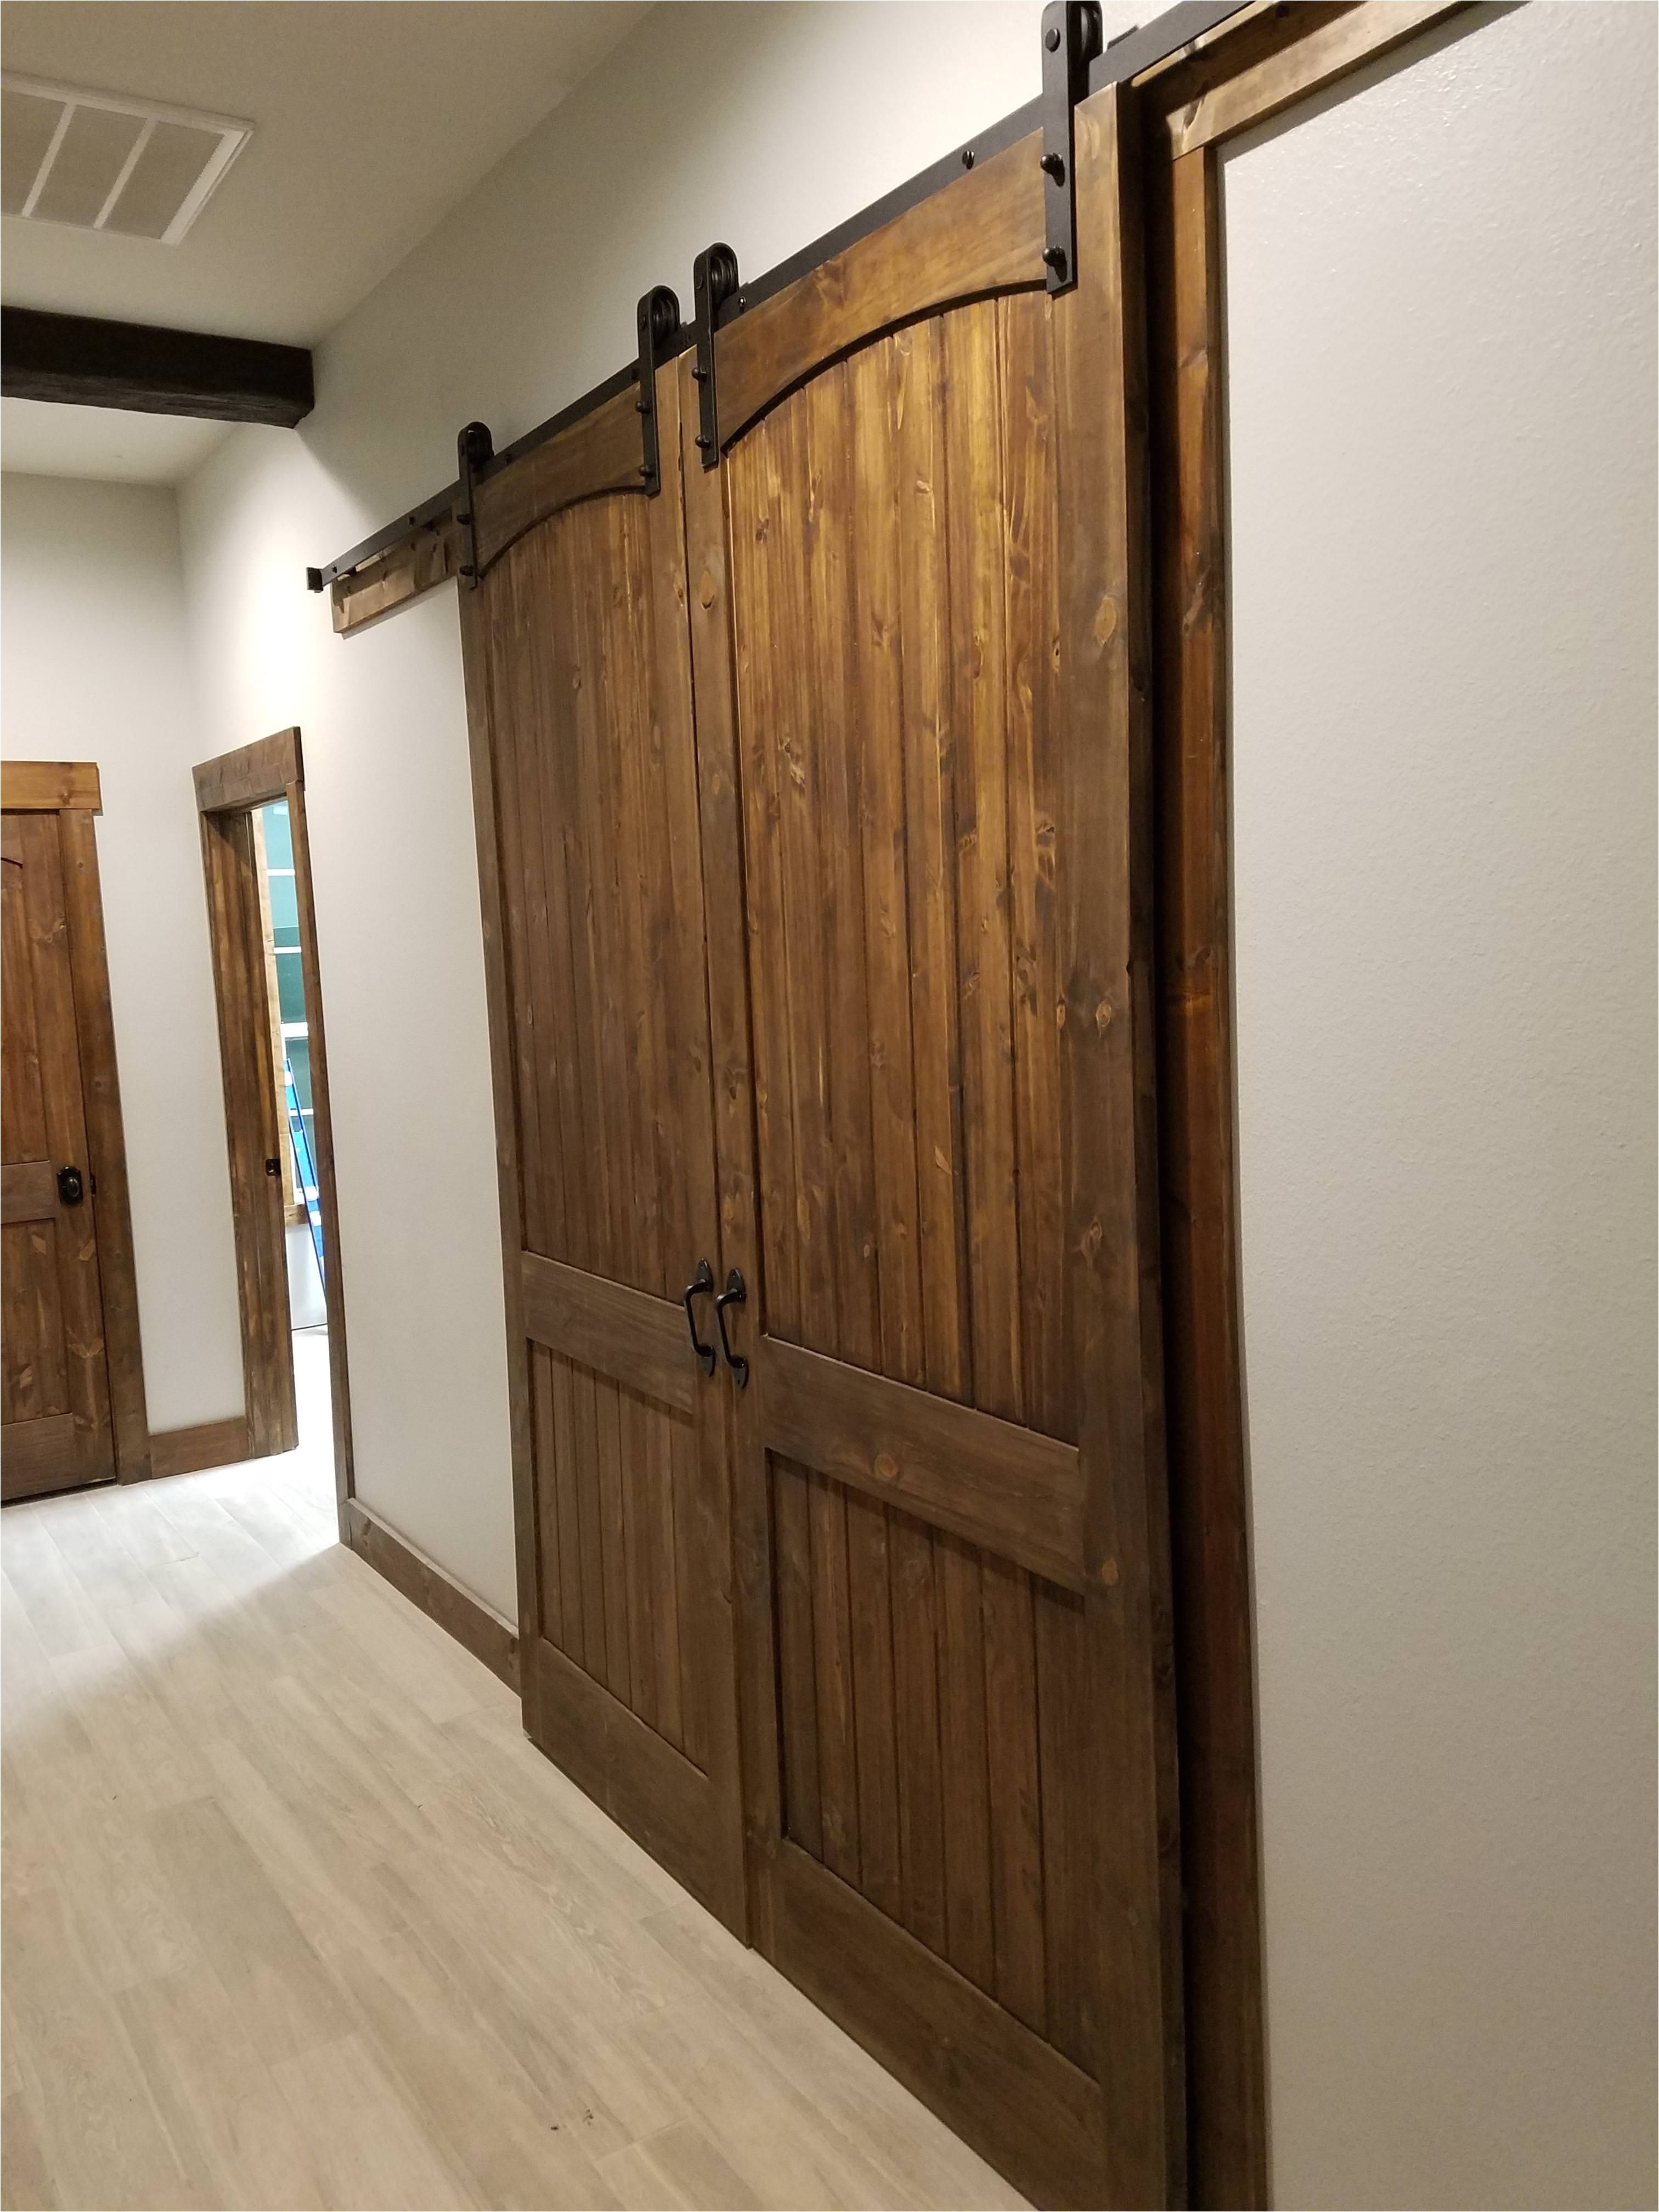 installed a 8ft double sliding barn door on my media room entrance quickcrafter